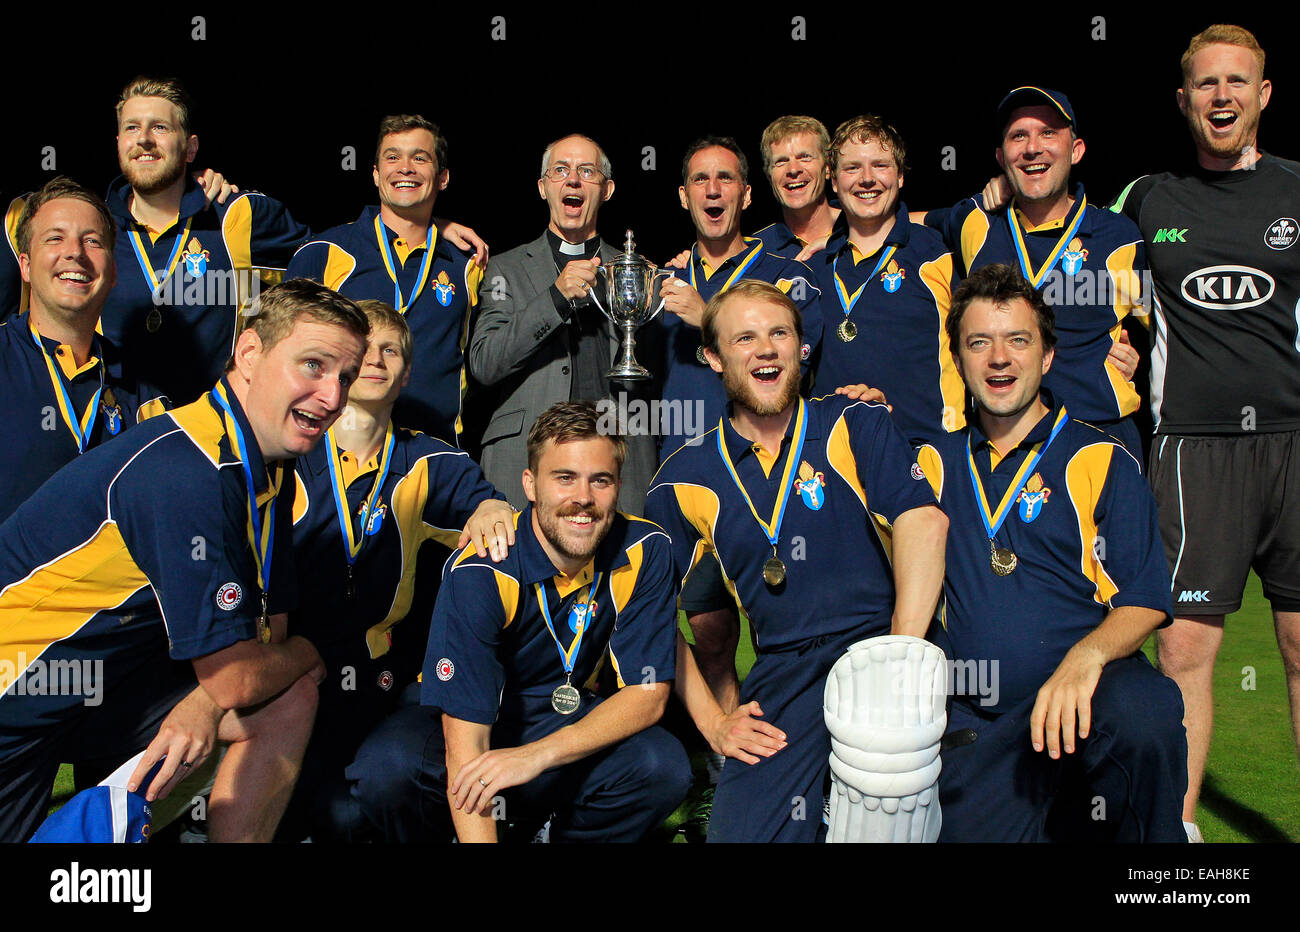 Cricket - The Most Reverend Justin Welby, Archbishop of Canterbury, with the victorious Archbishop XI team and a trophy Stock Photo